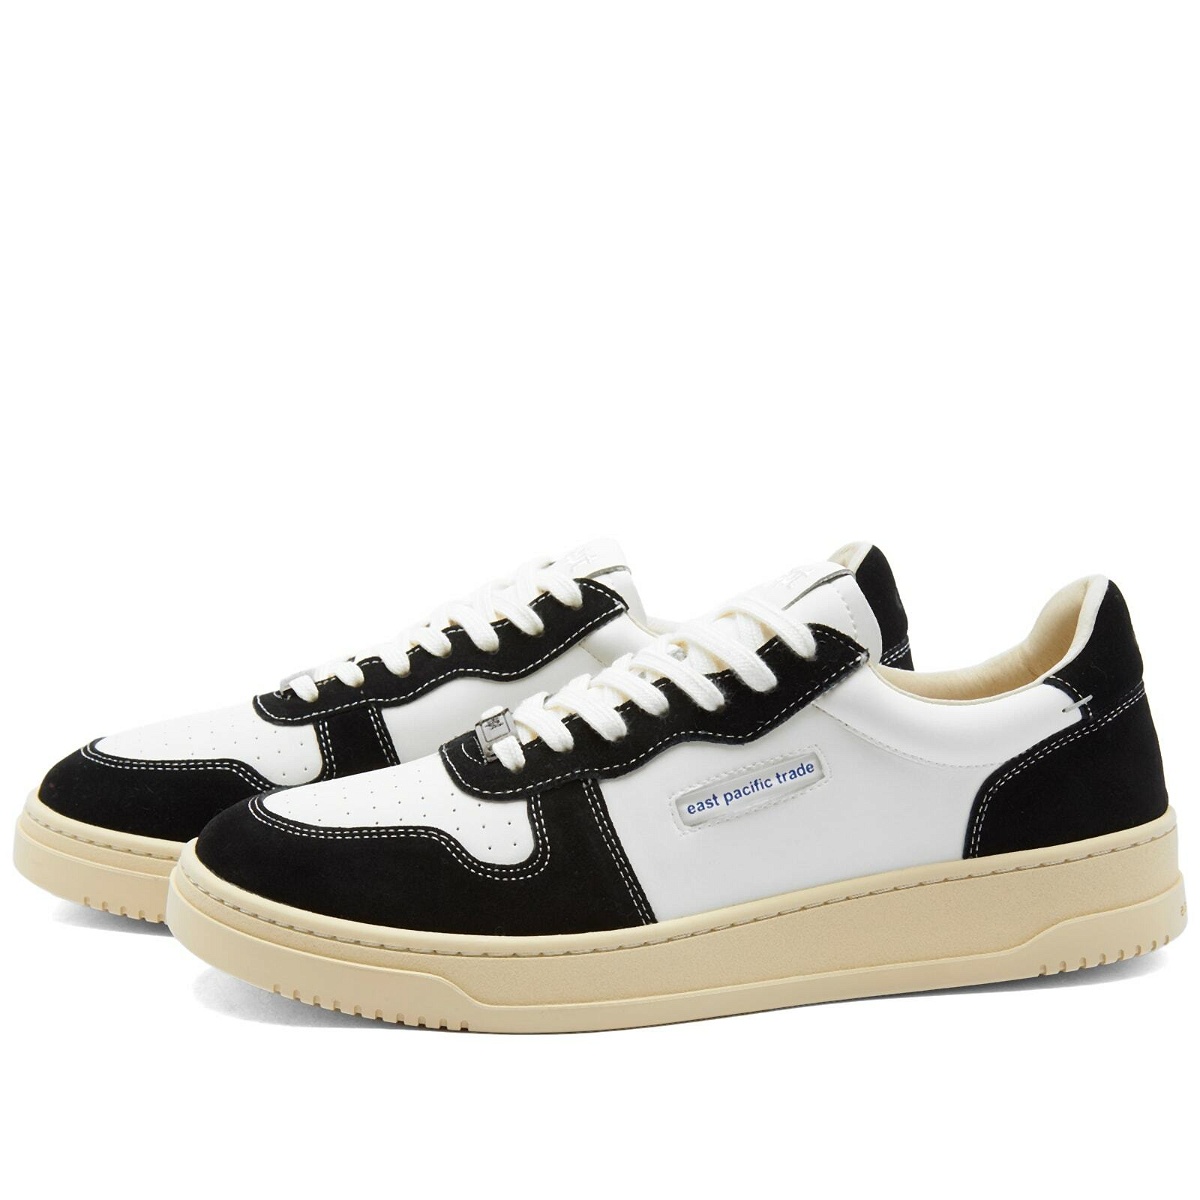 Photo: East Pacific Trade Men's Dive Court Sneakers in Off White